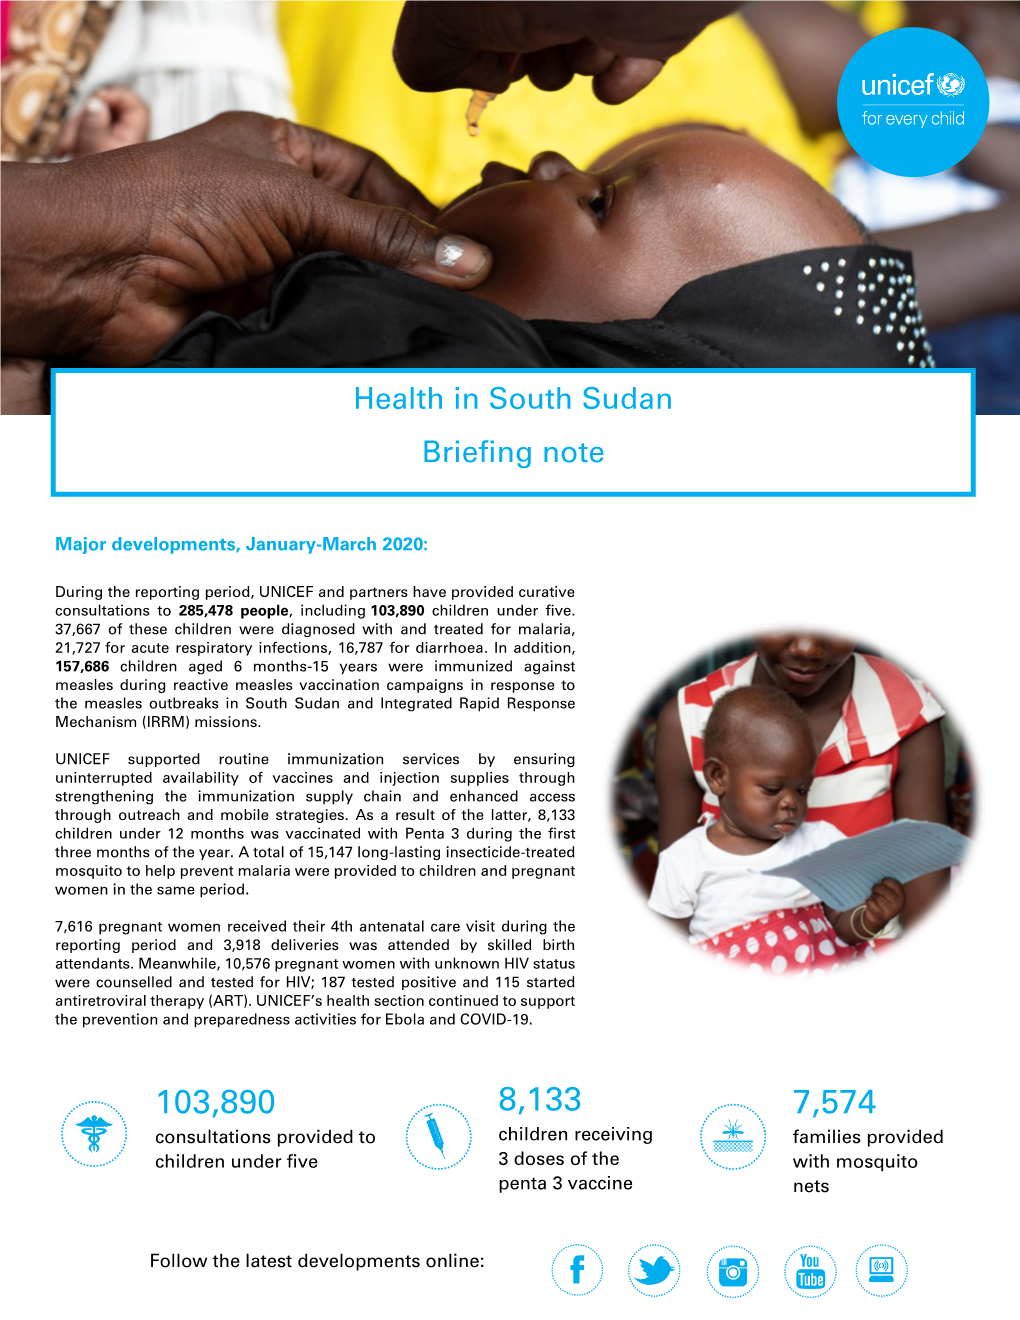 Health in South Sudan Briefing Note